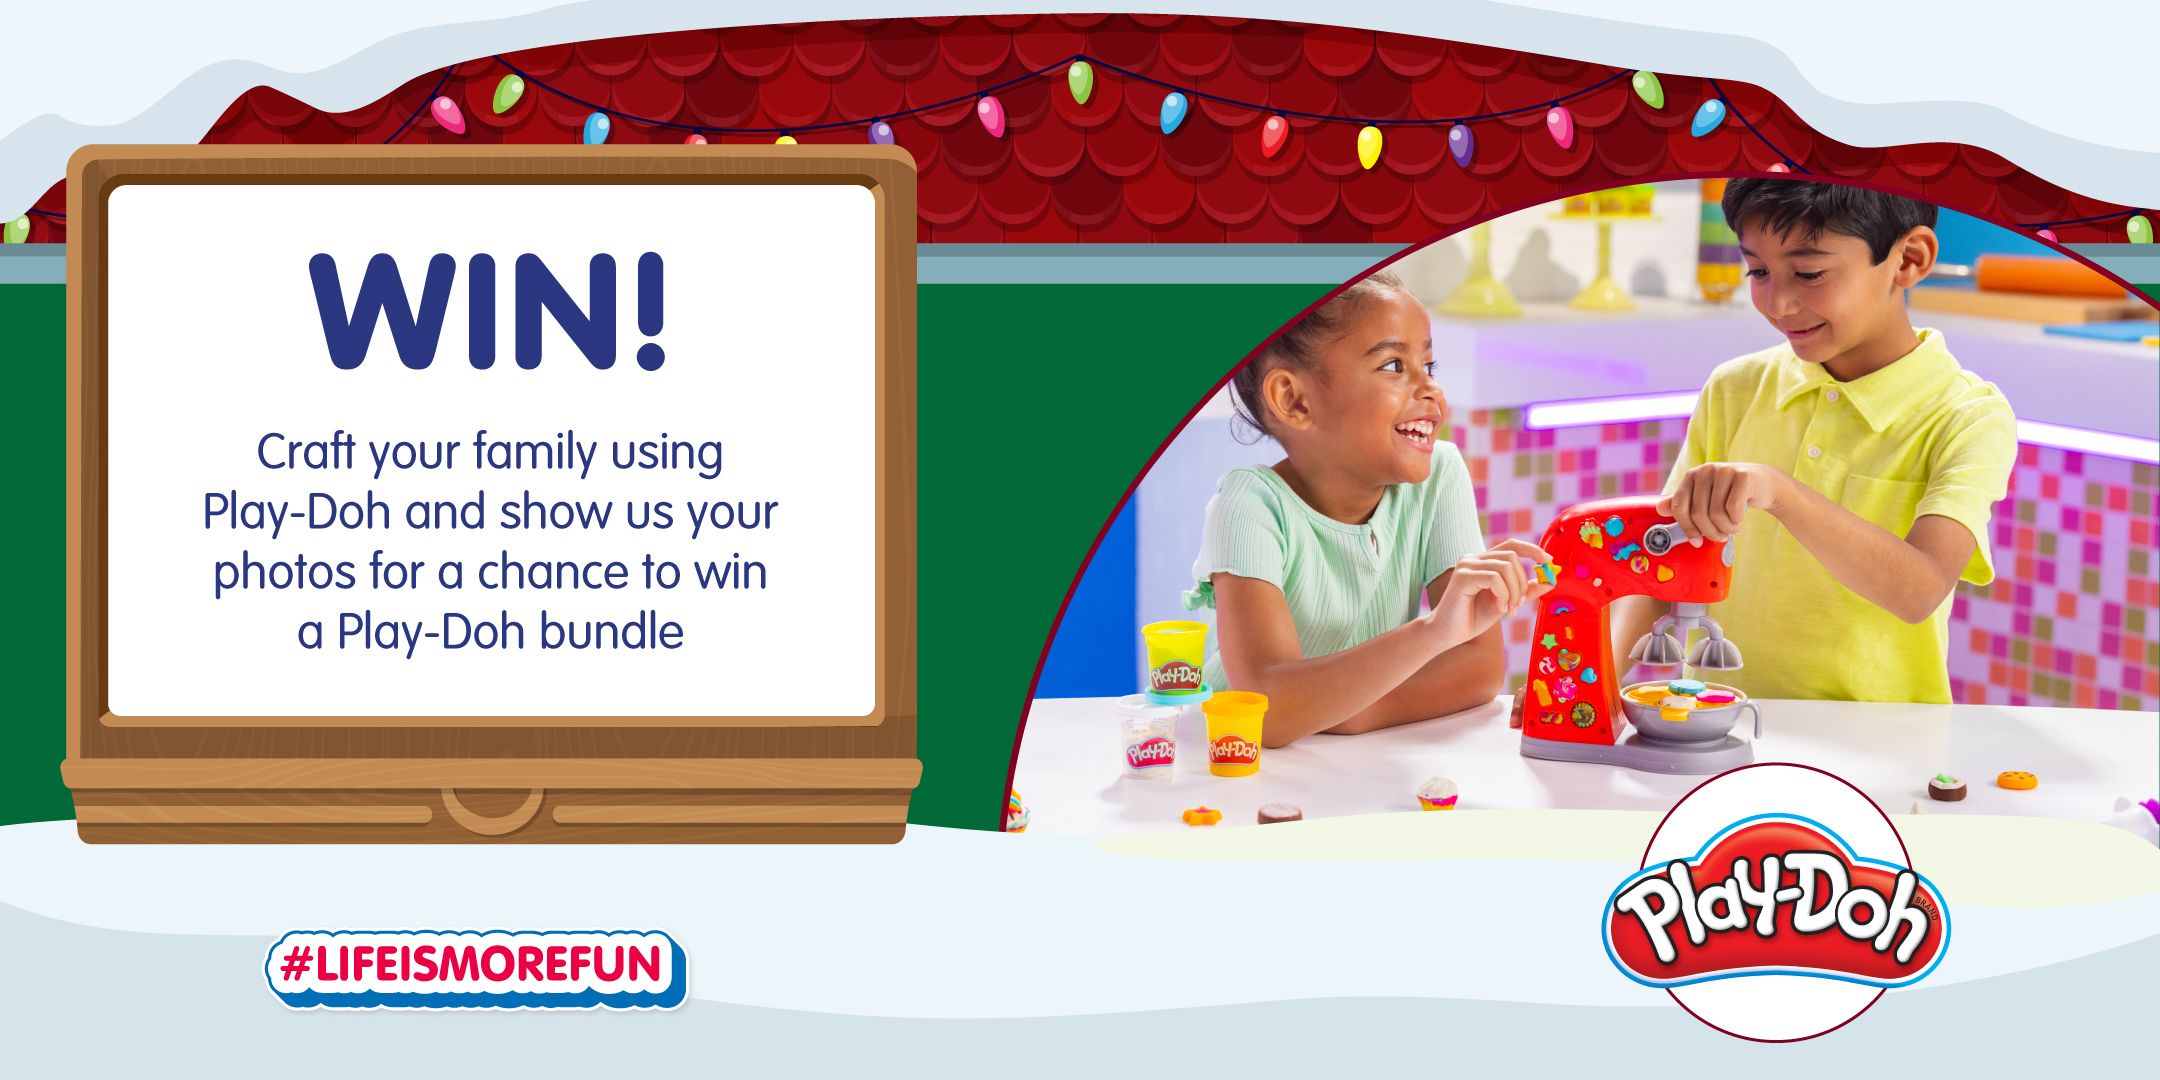 Win! Craft your family using Play-Doh and show us your photos for a chance to win a Play-Doh bundle! #lifeismorefun